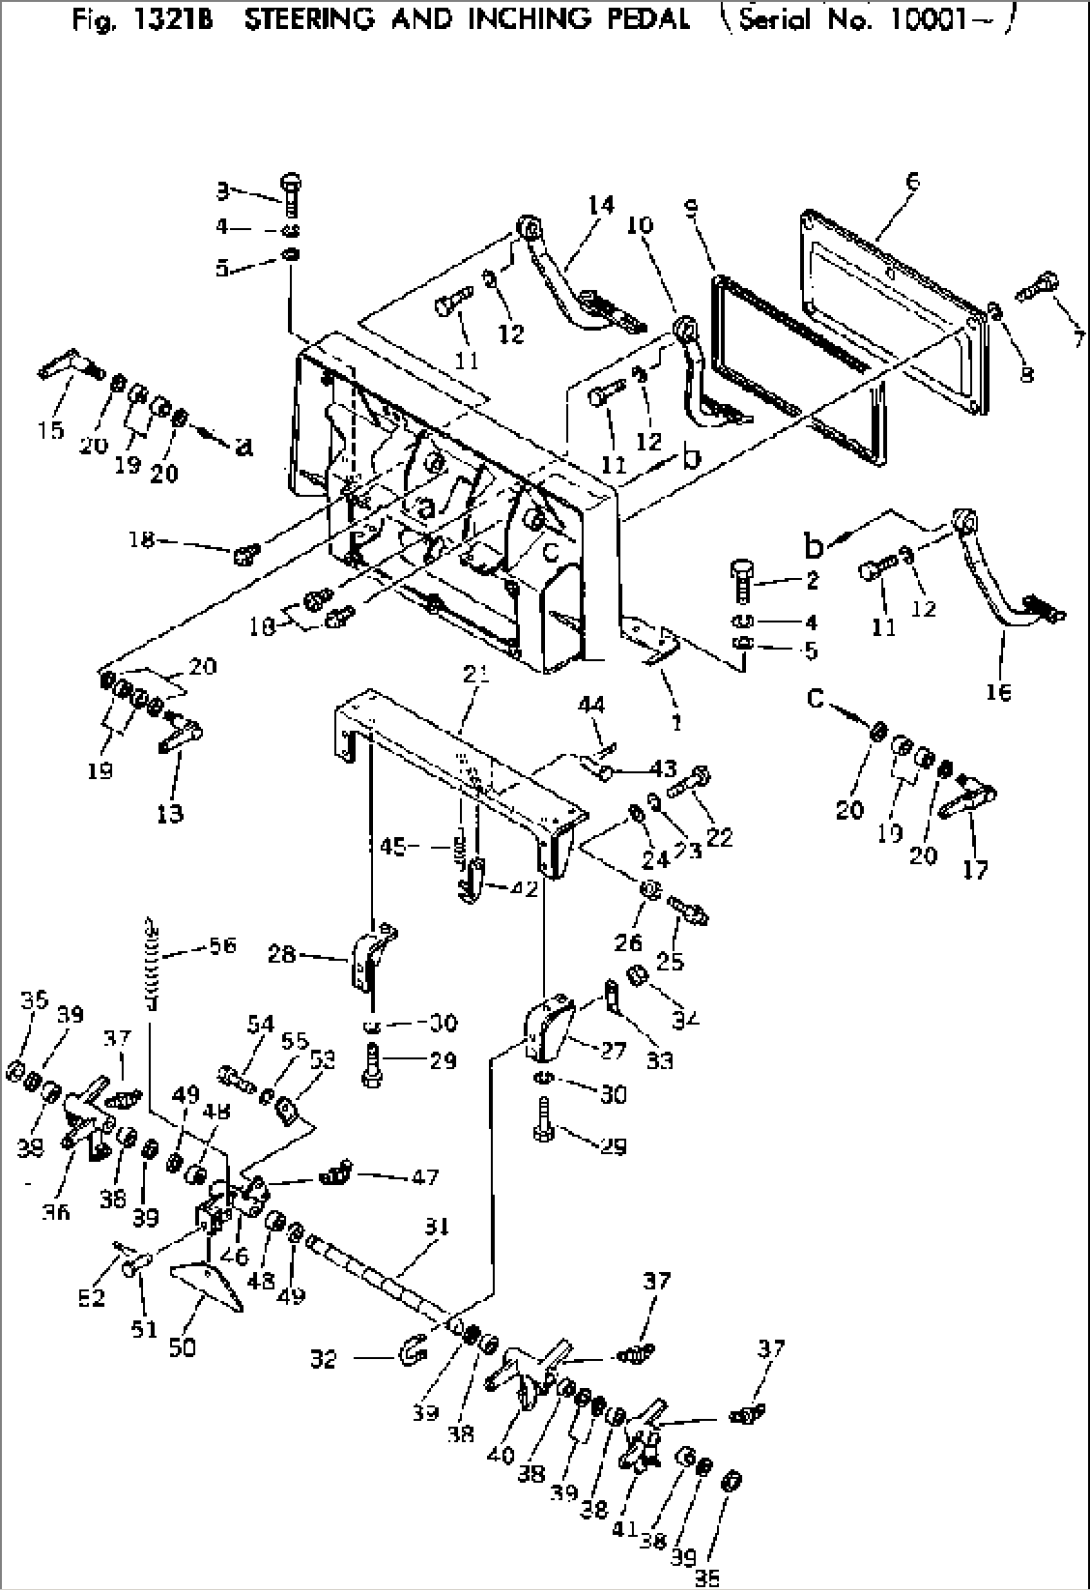 STEERING AND INCHING PEDAL(#10001-)